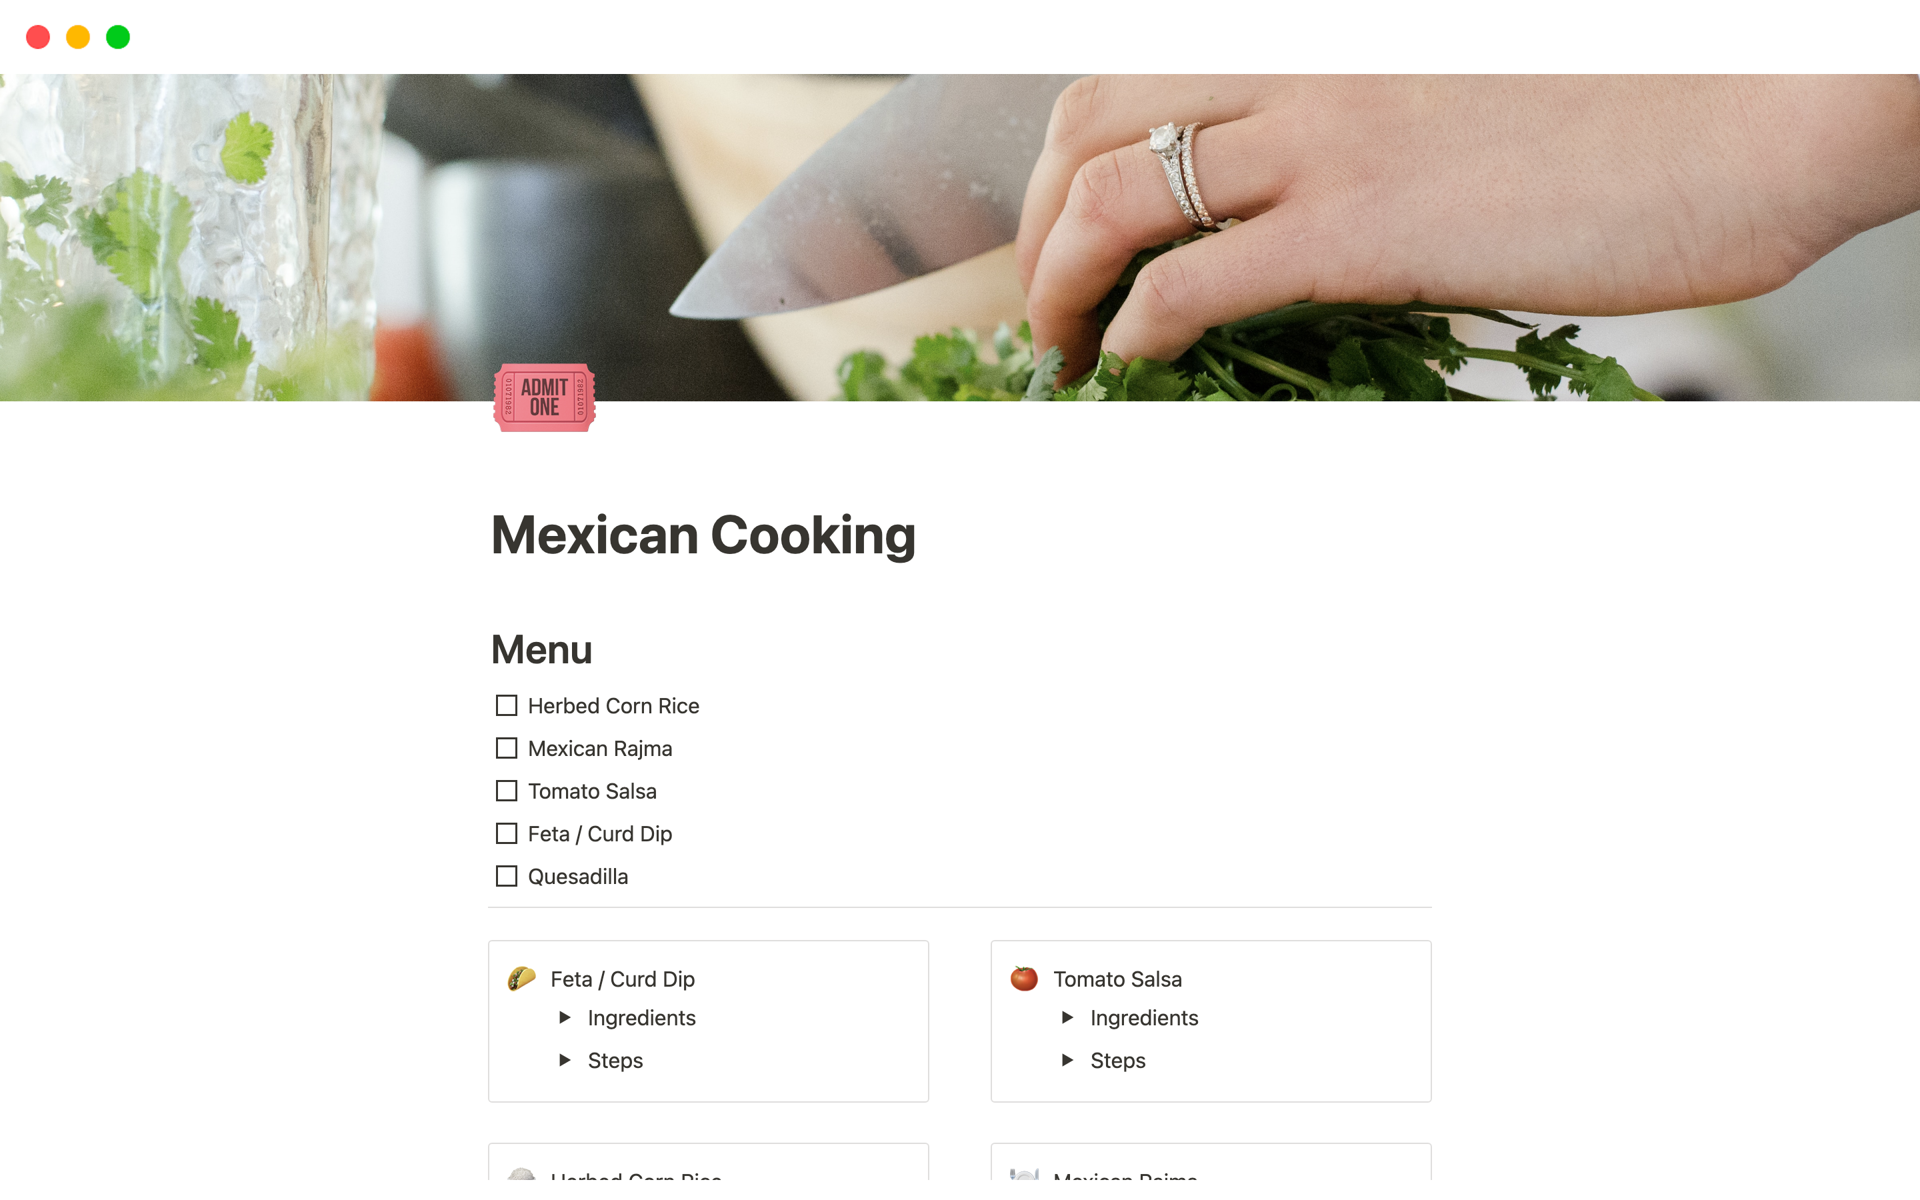 Cooking Guide Template is designed to simplify your culinary journey and help you become a master chef in your own kitchen